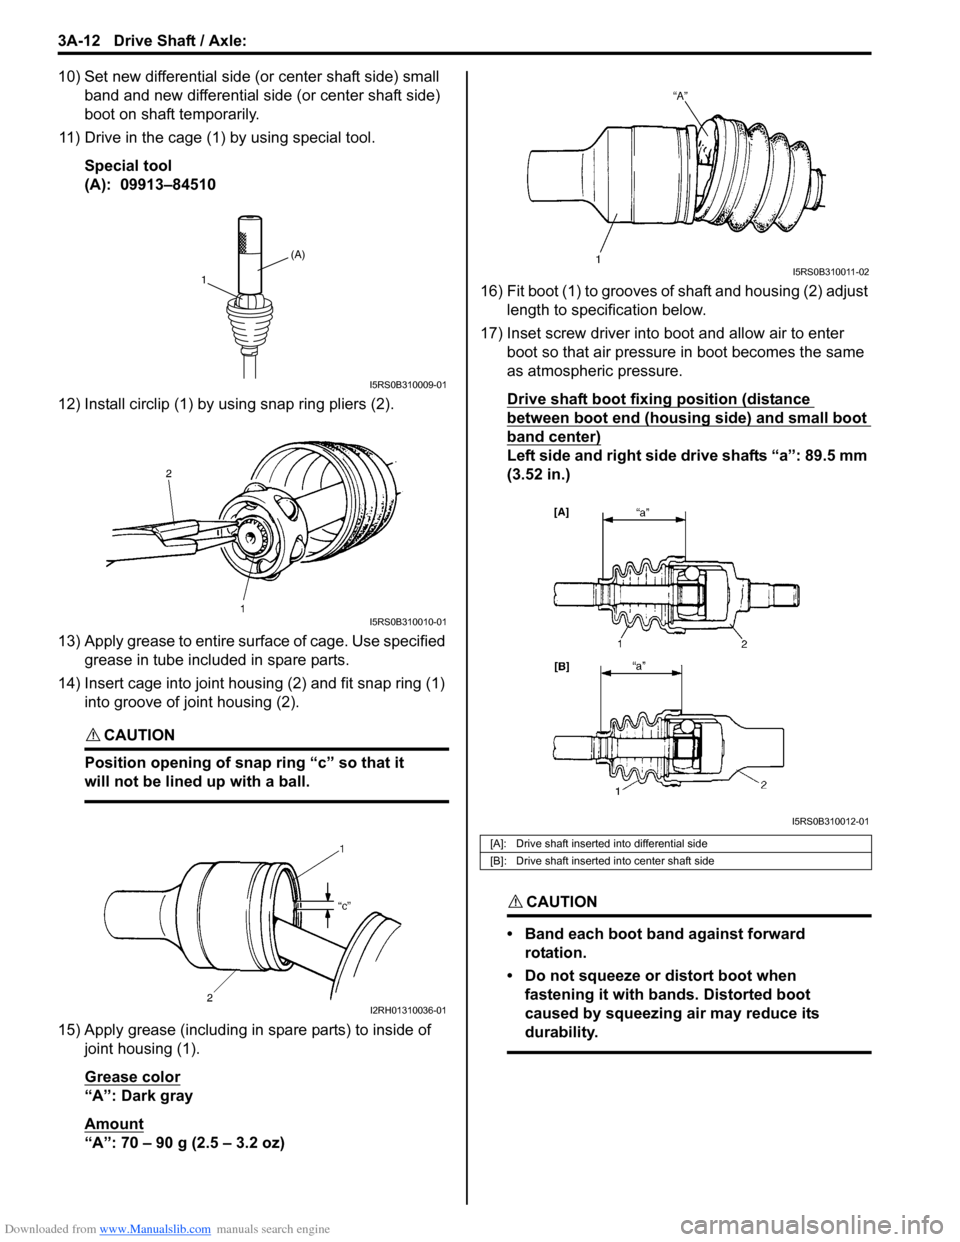 SUZUKI SWIFT 2008 2.G Service Workshop Manual Downloaded from www.Manualslib.com manuals search engine 3A-12 Drive Shaft / Axle: 
10) Set new differential side (or center shaft side) small band and new differential side (or center shaft side) 
bo